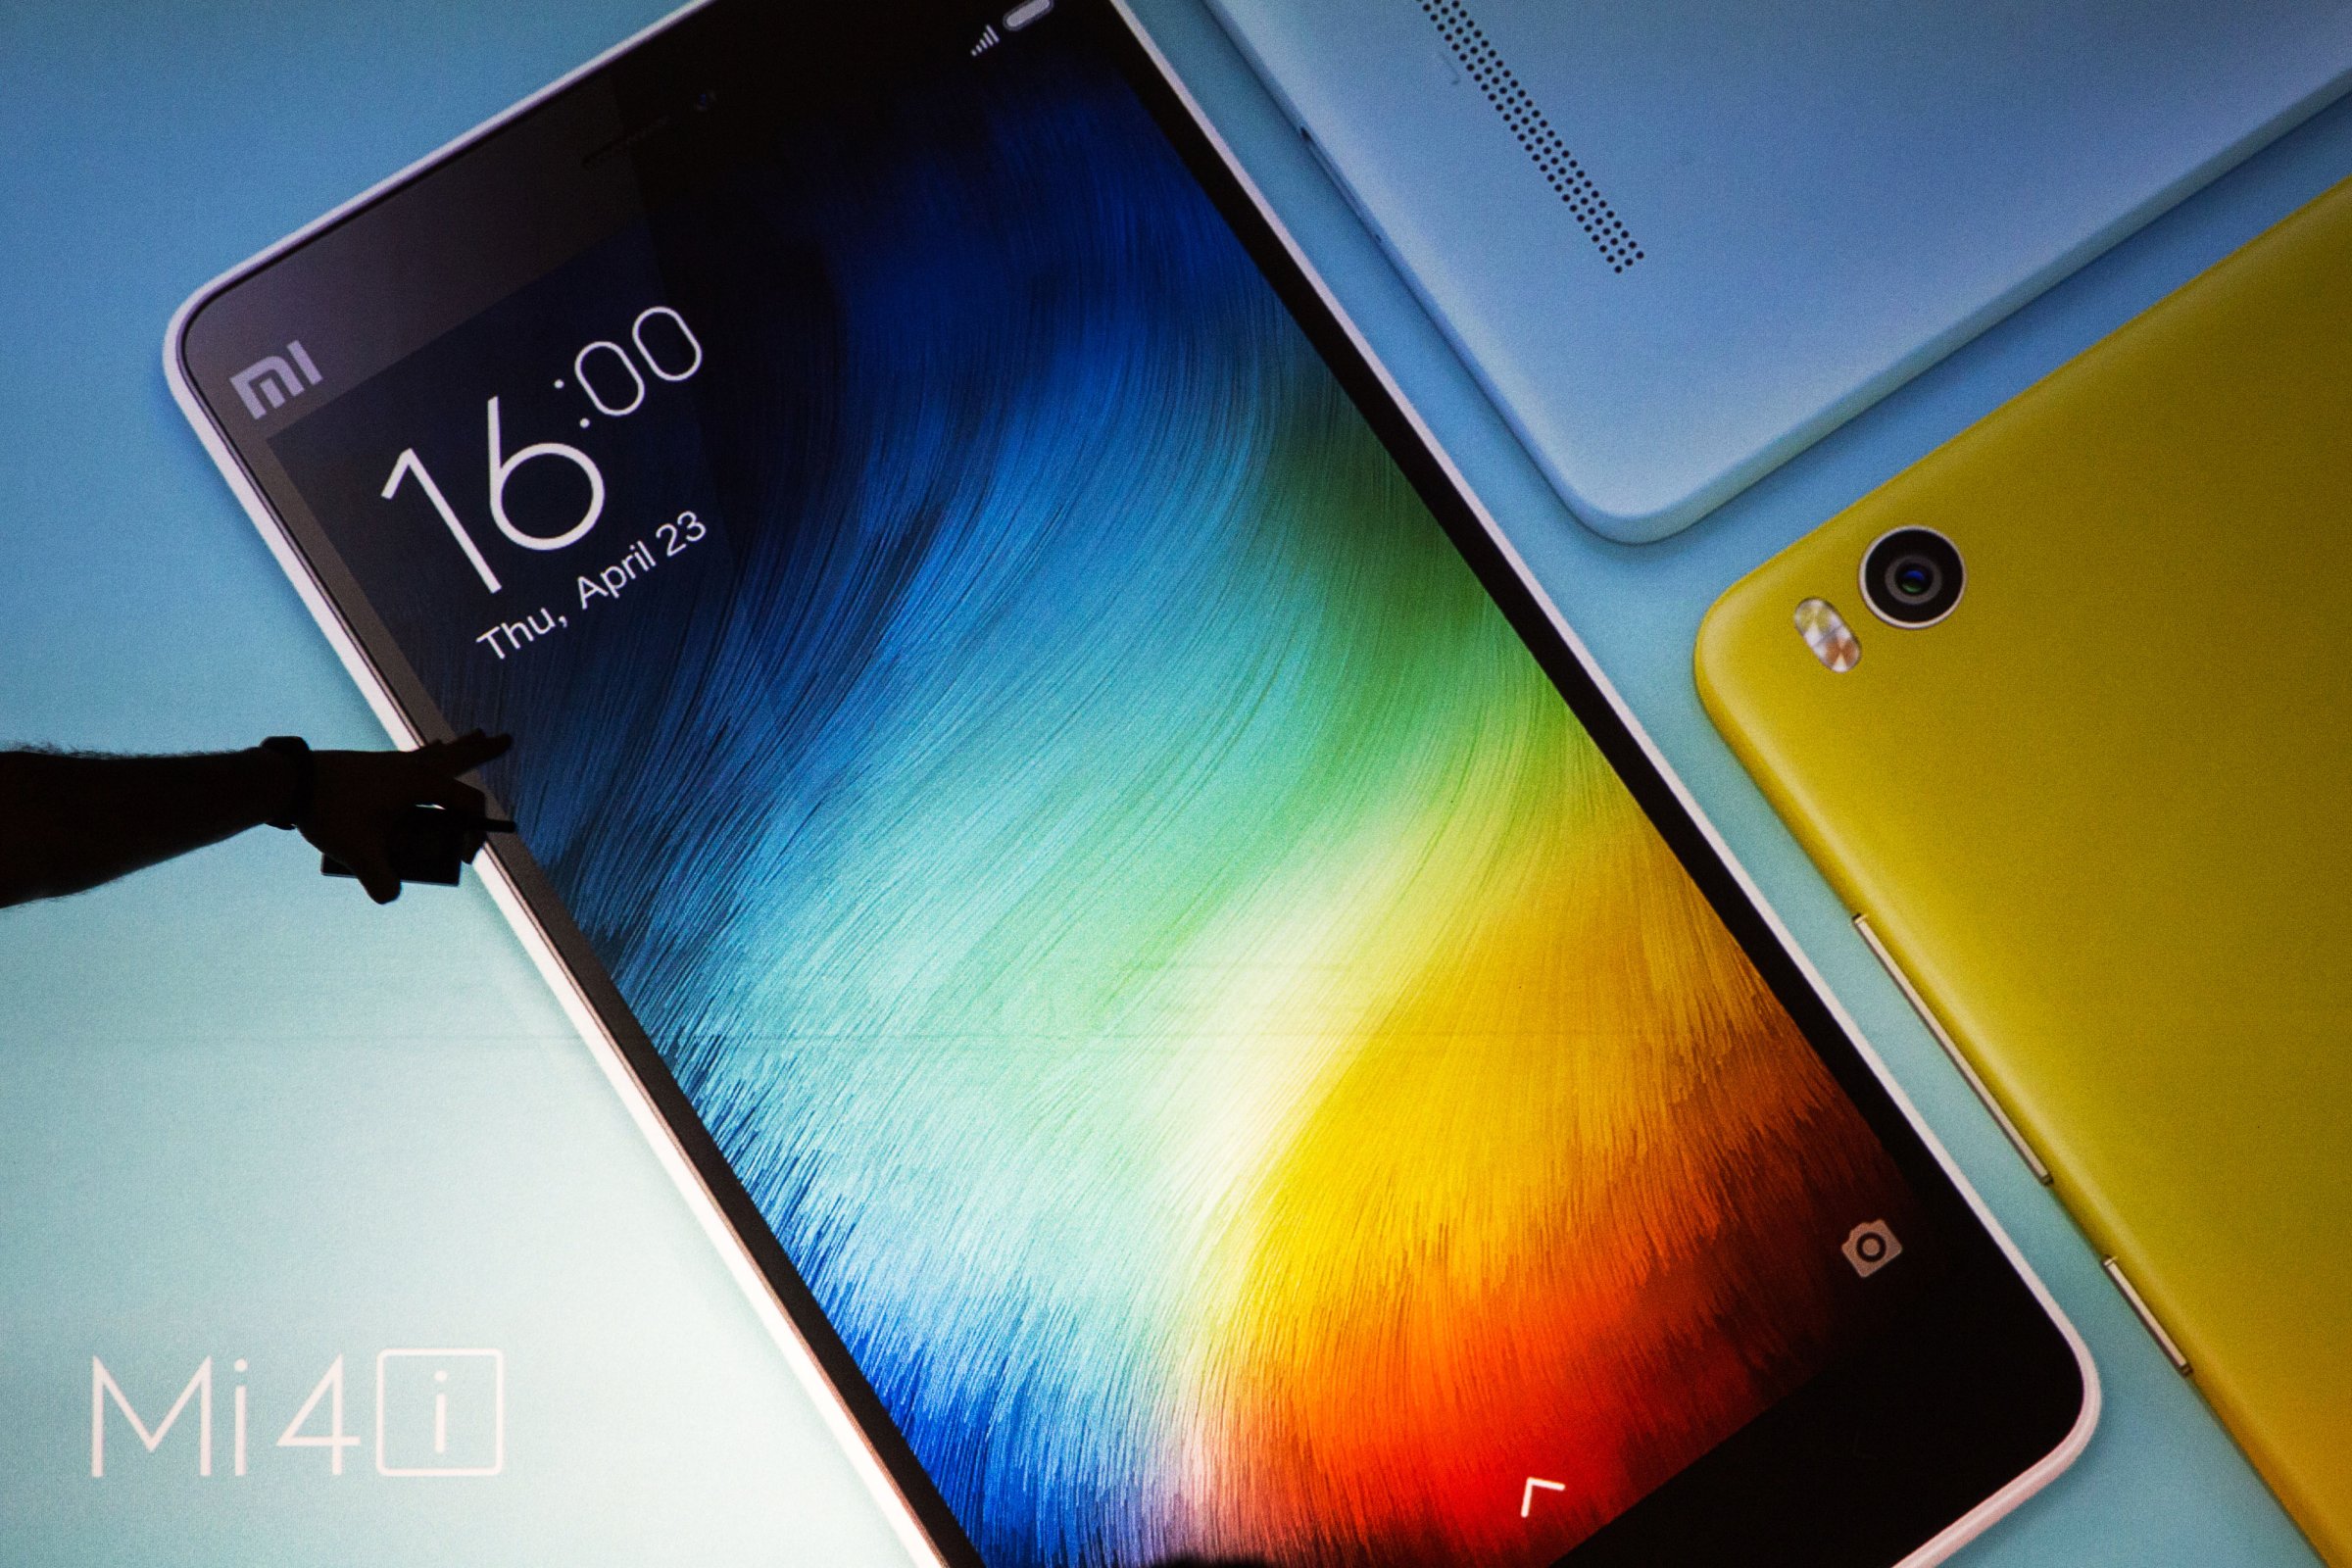 Xiaomi Corp. Vice President of Global Operations Hugo Barra Launches The Mi 4i Smartphone